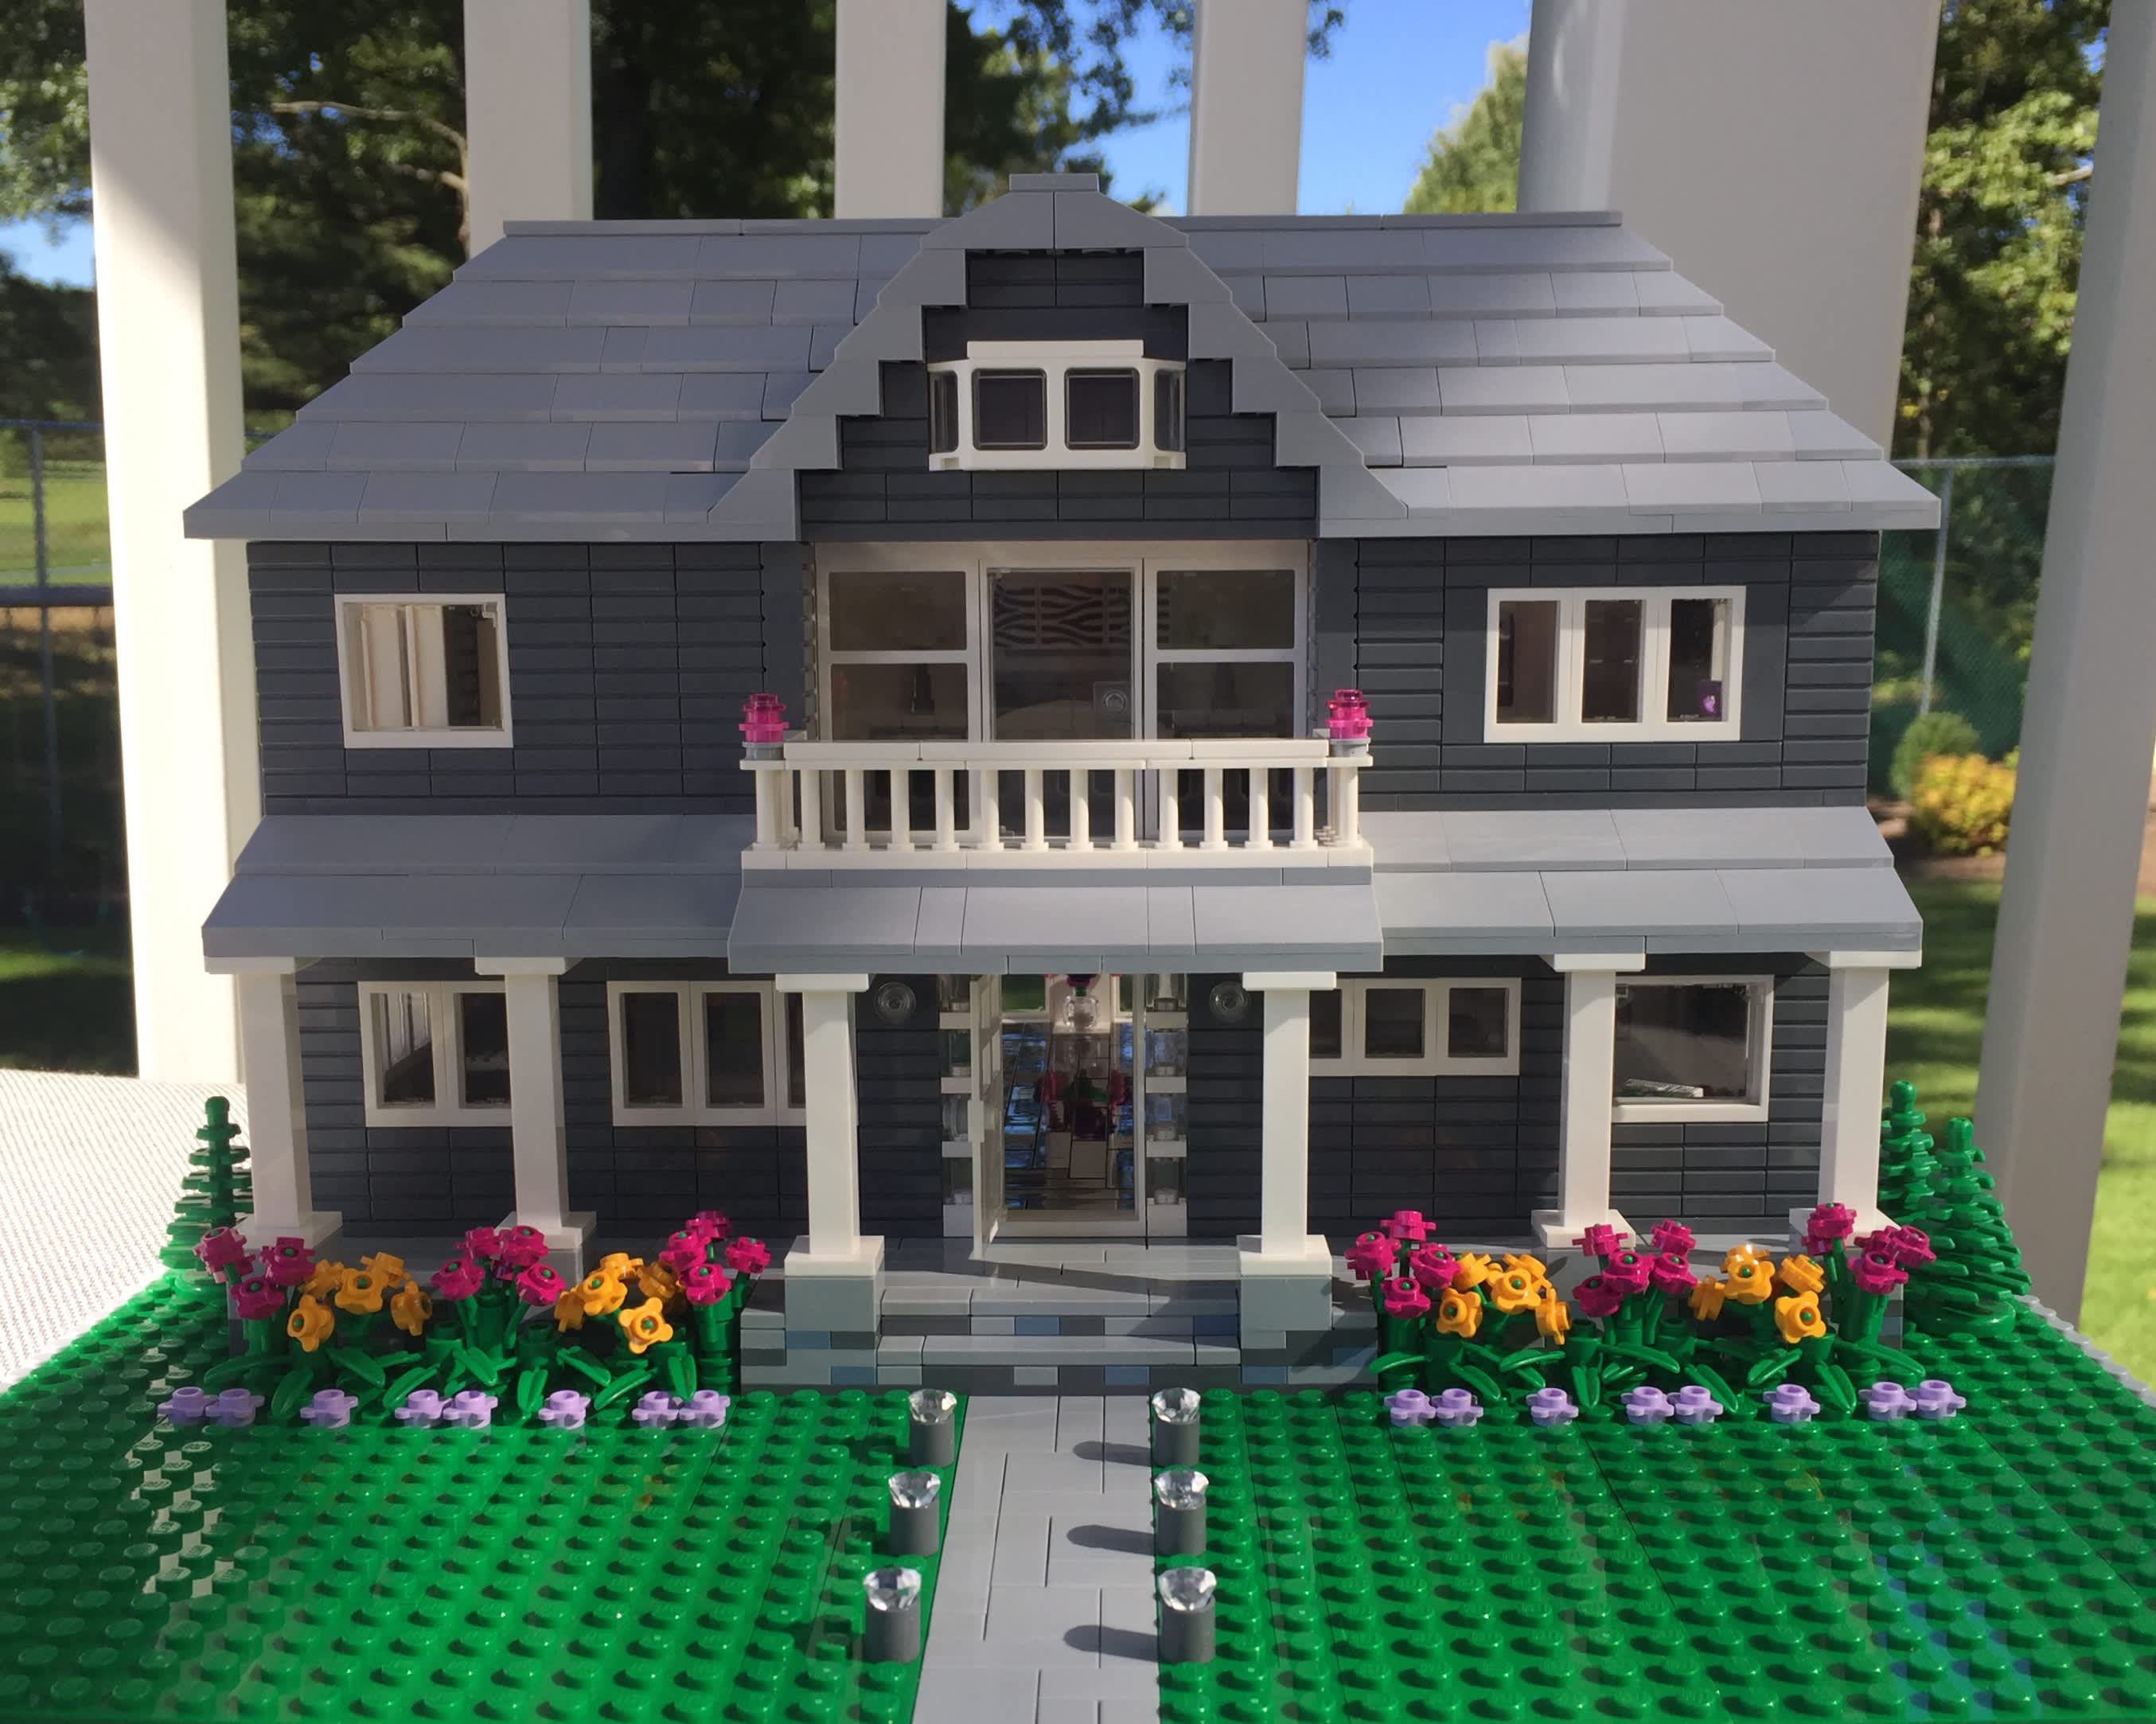 operation Pirat linned Custom Etsy Shop LEGO House Design Photos | Apartment Therapy